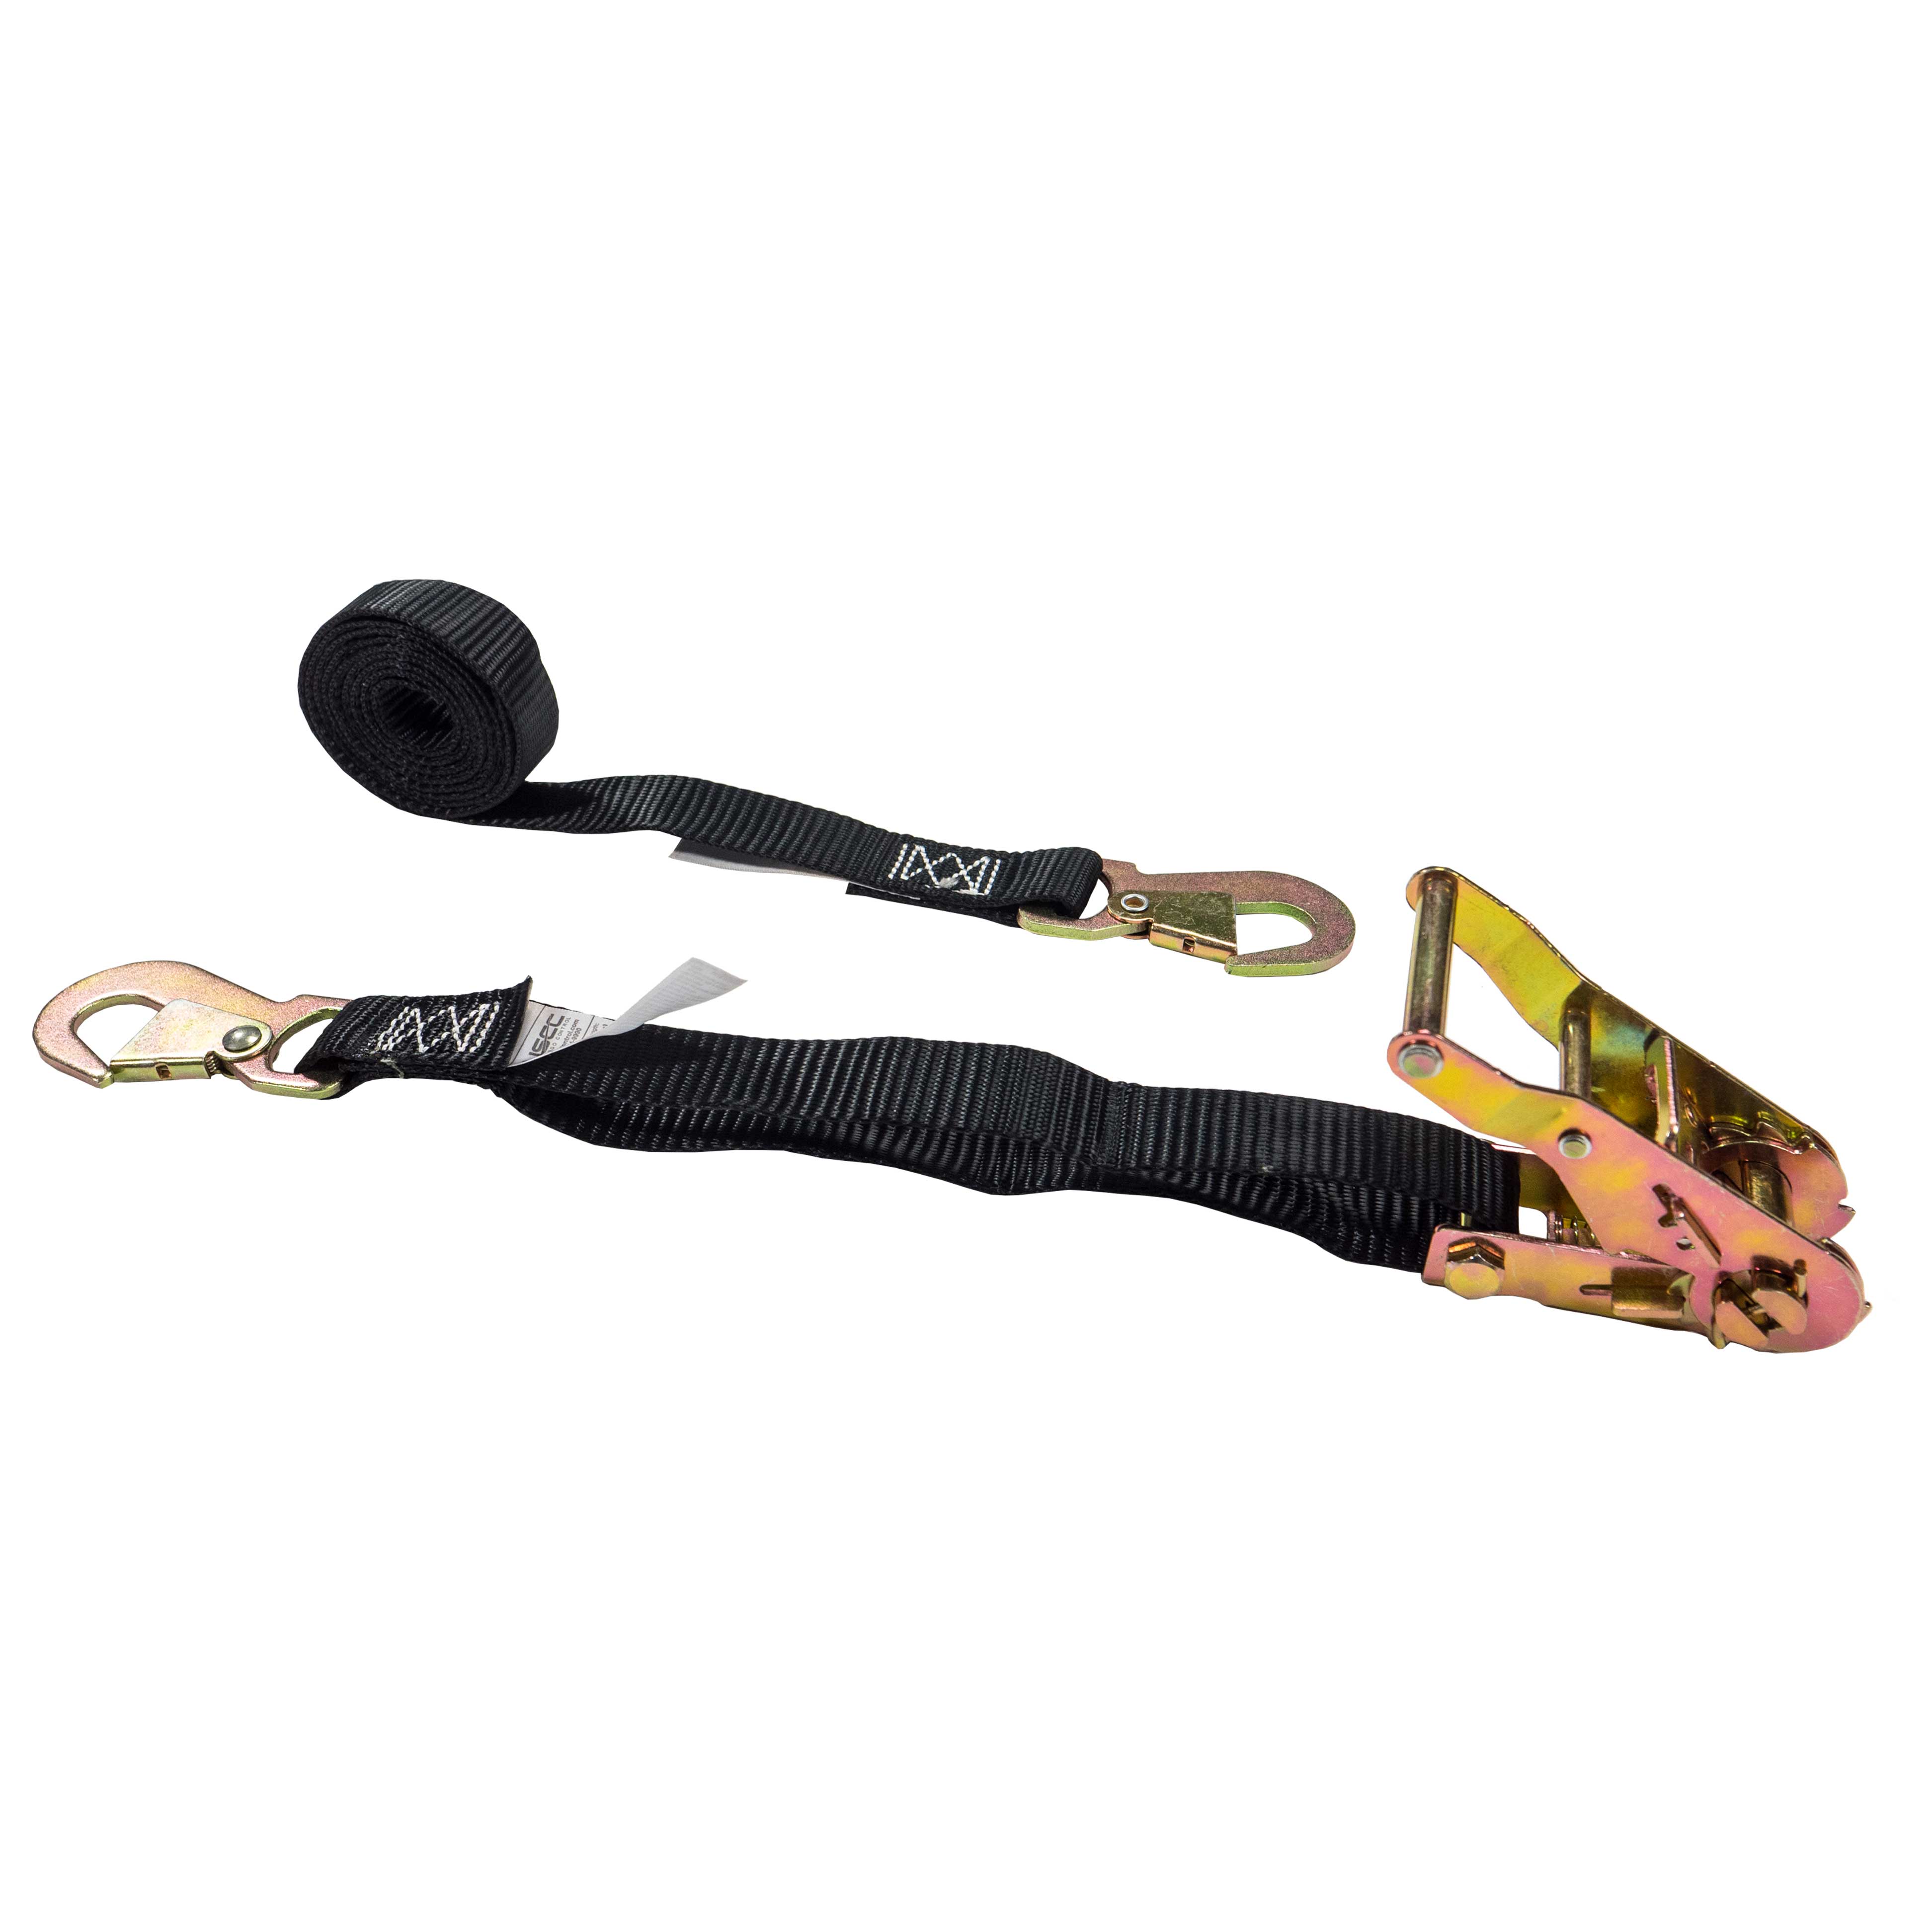 US Cargo Control C506SH 1 x 6' Cam Buckle Strap with S-Hooks